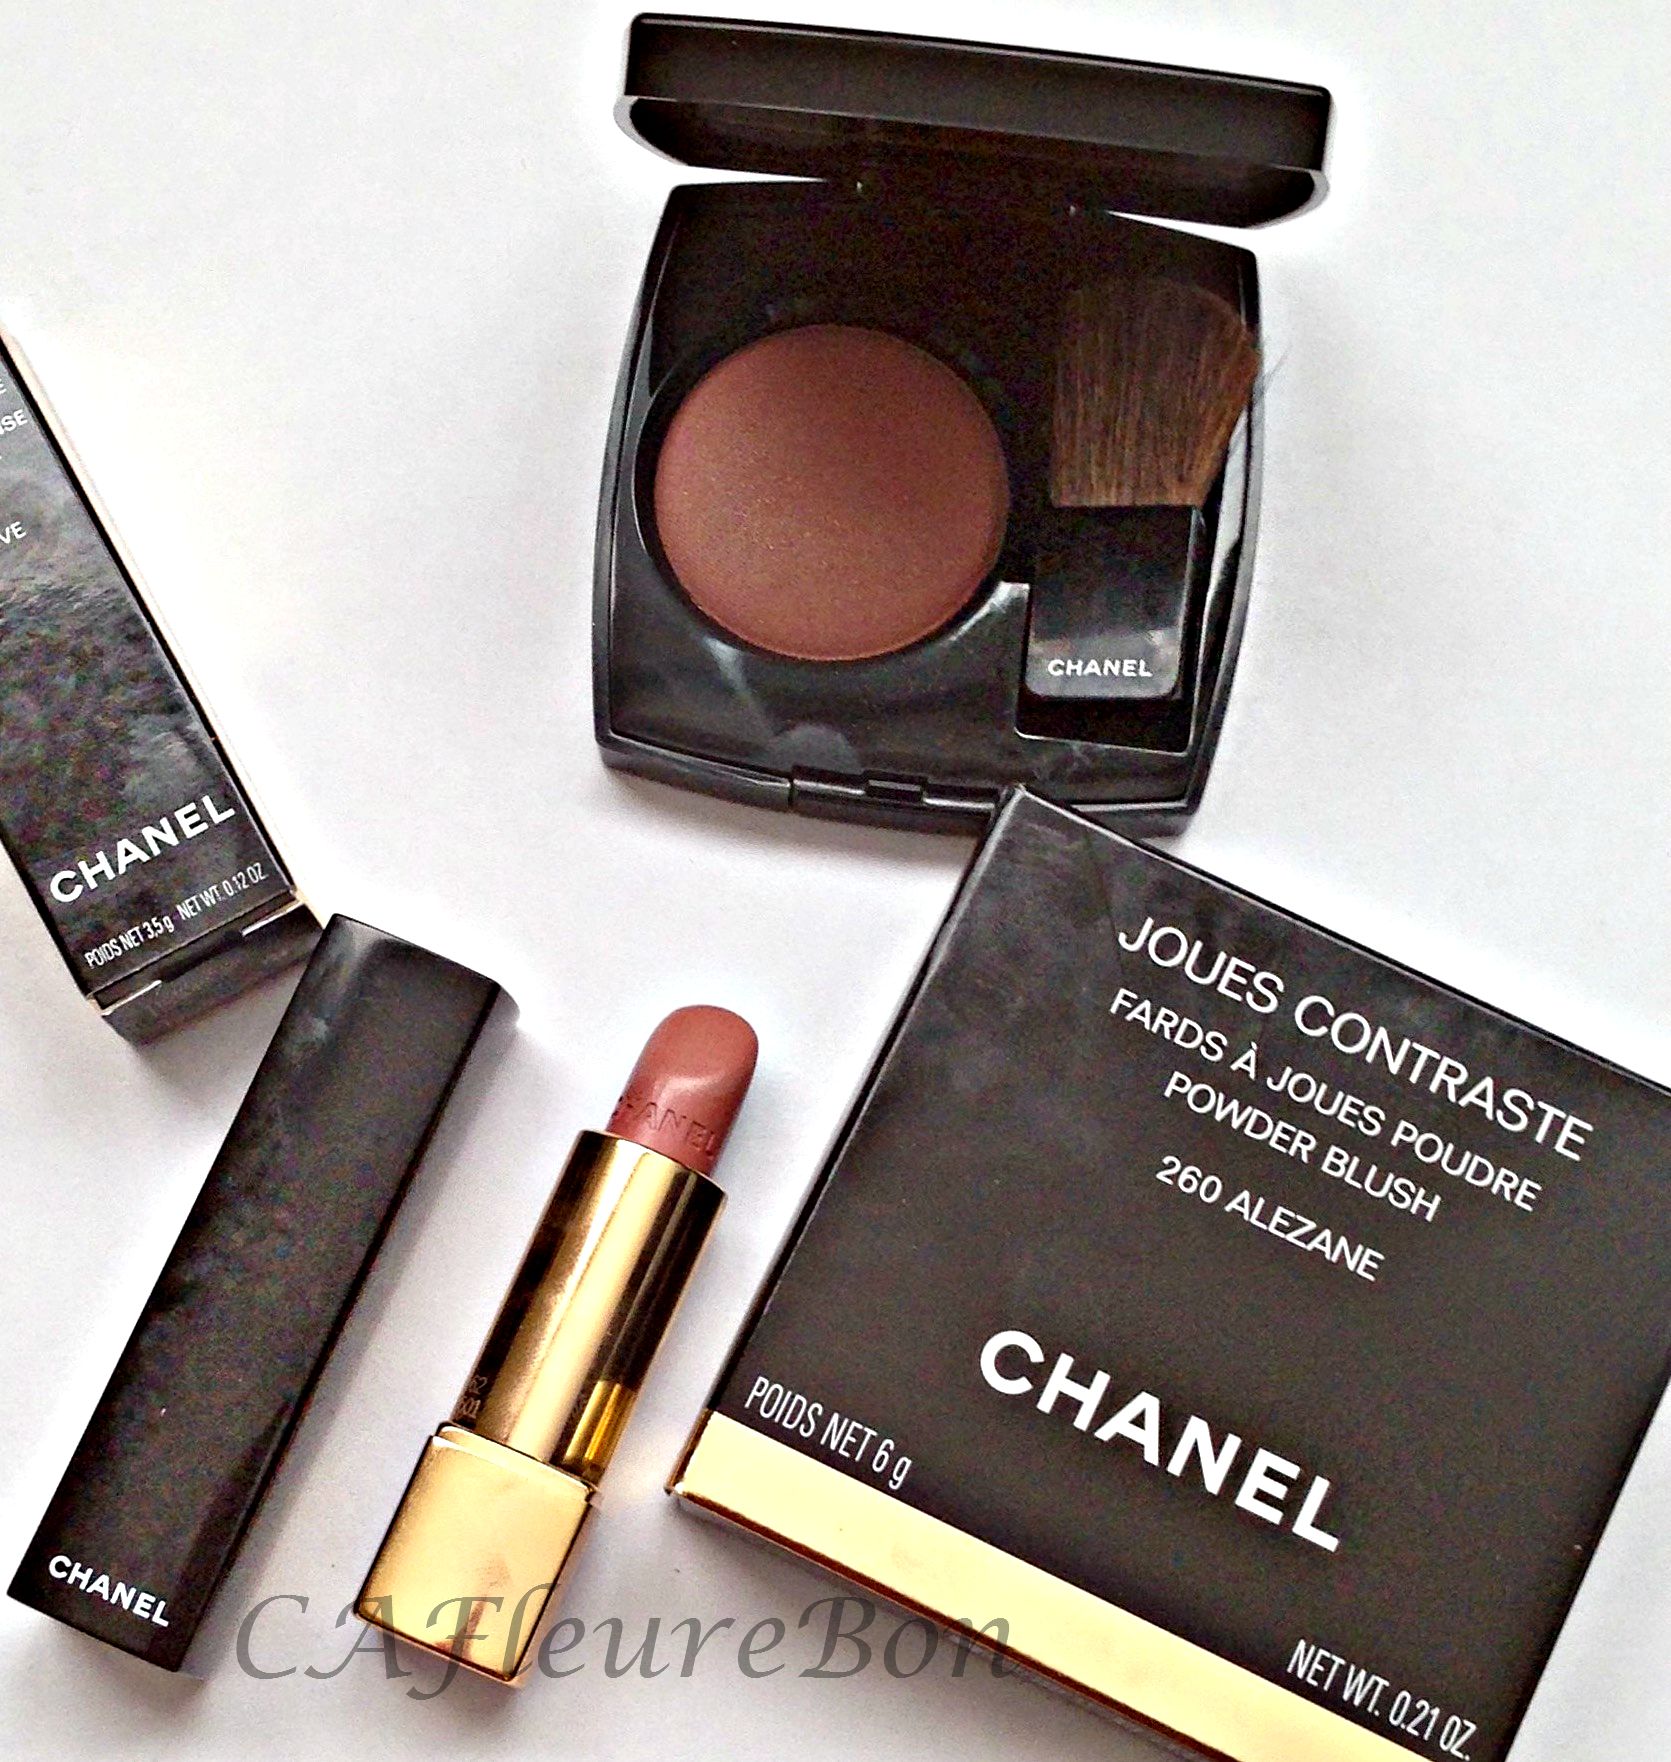 Fall 2015 CHANEL LES AUTOMNALES review